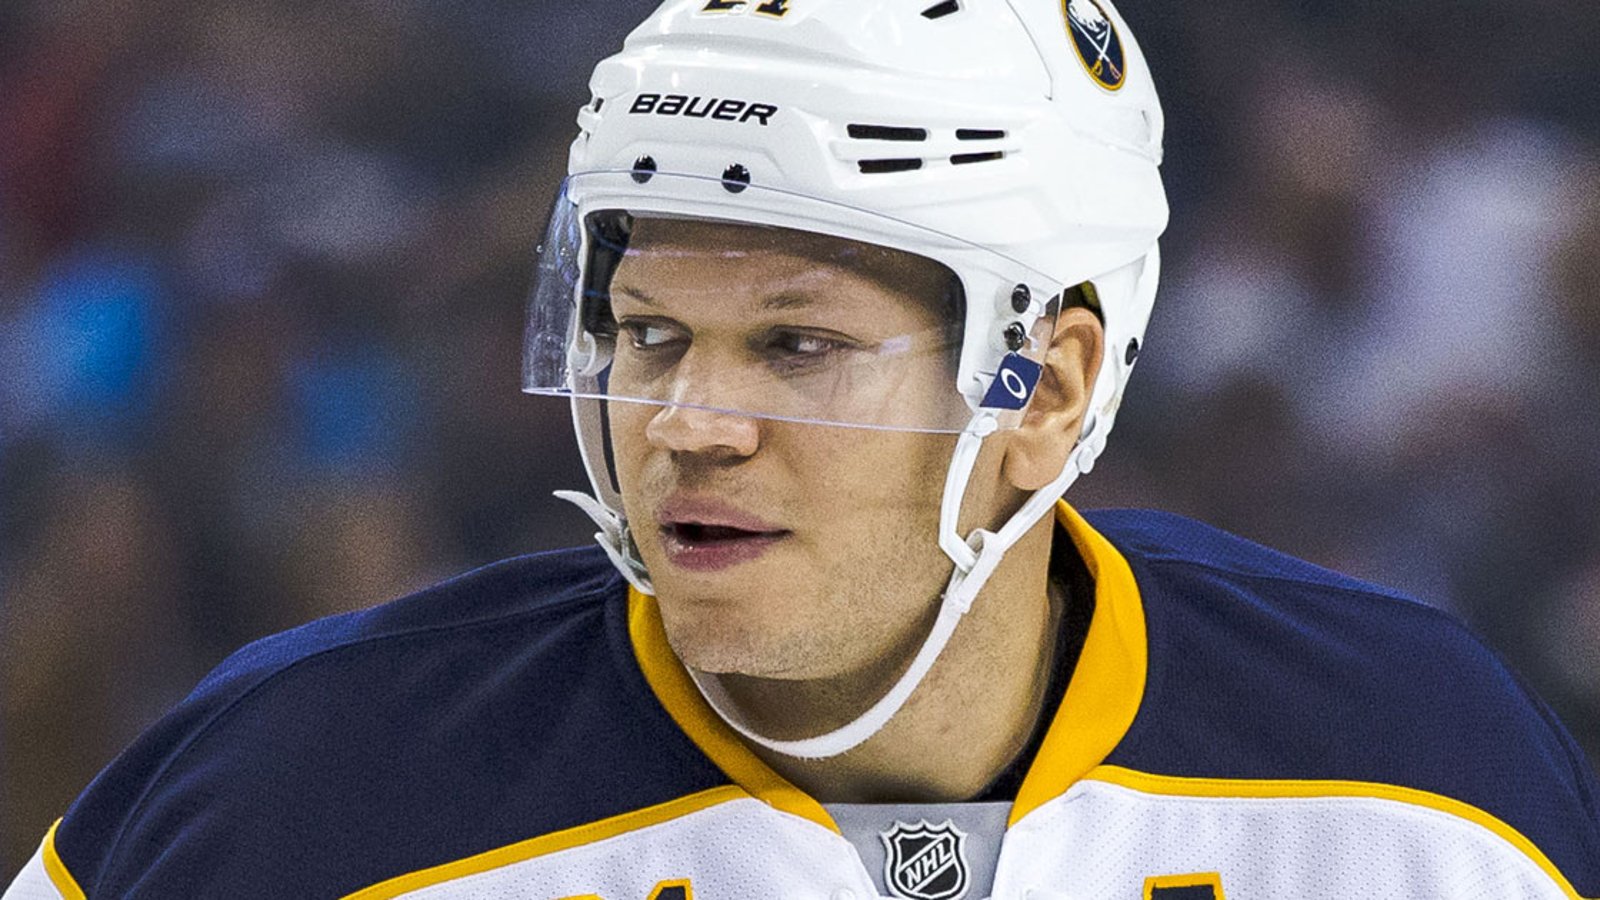 Injury report: Okposo's recovery after life-threatening ordeal 